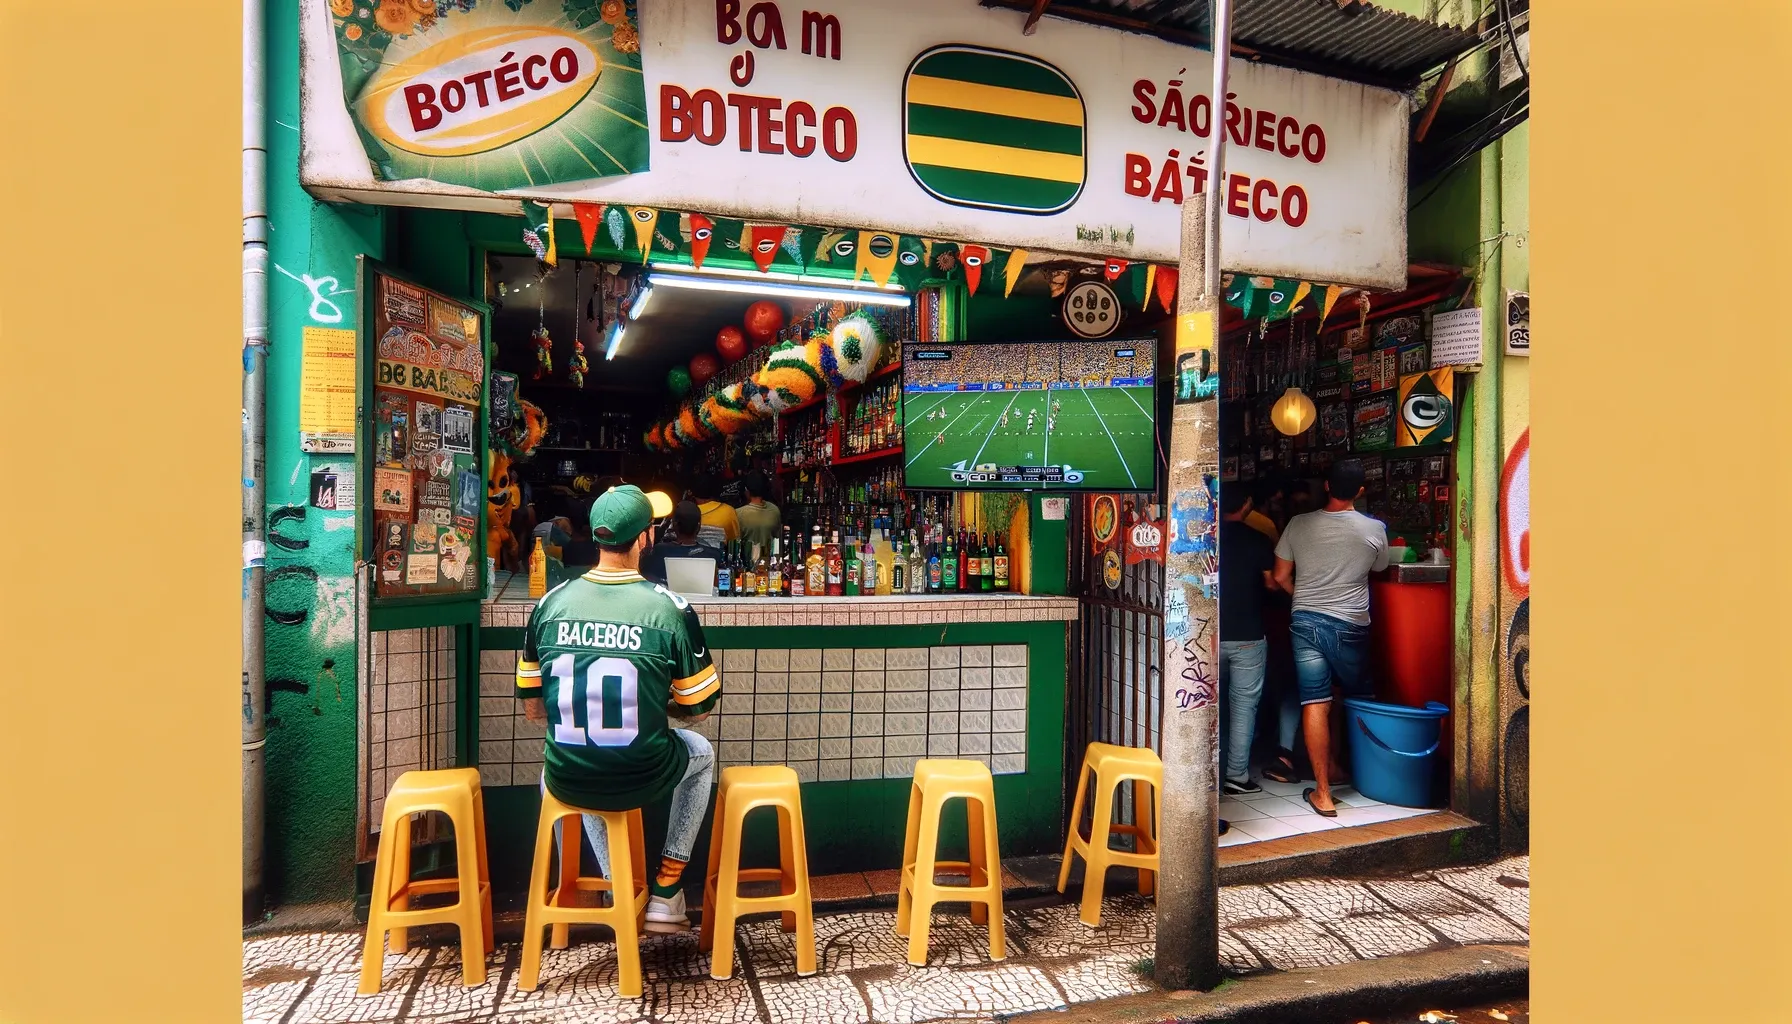 an AI generated image of a packers fan sitting at a boteco watching the game